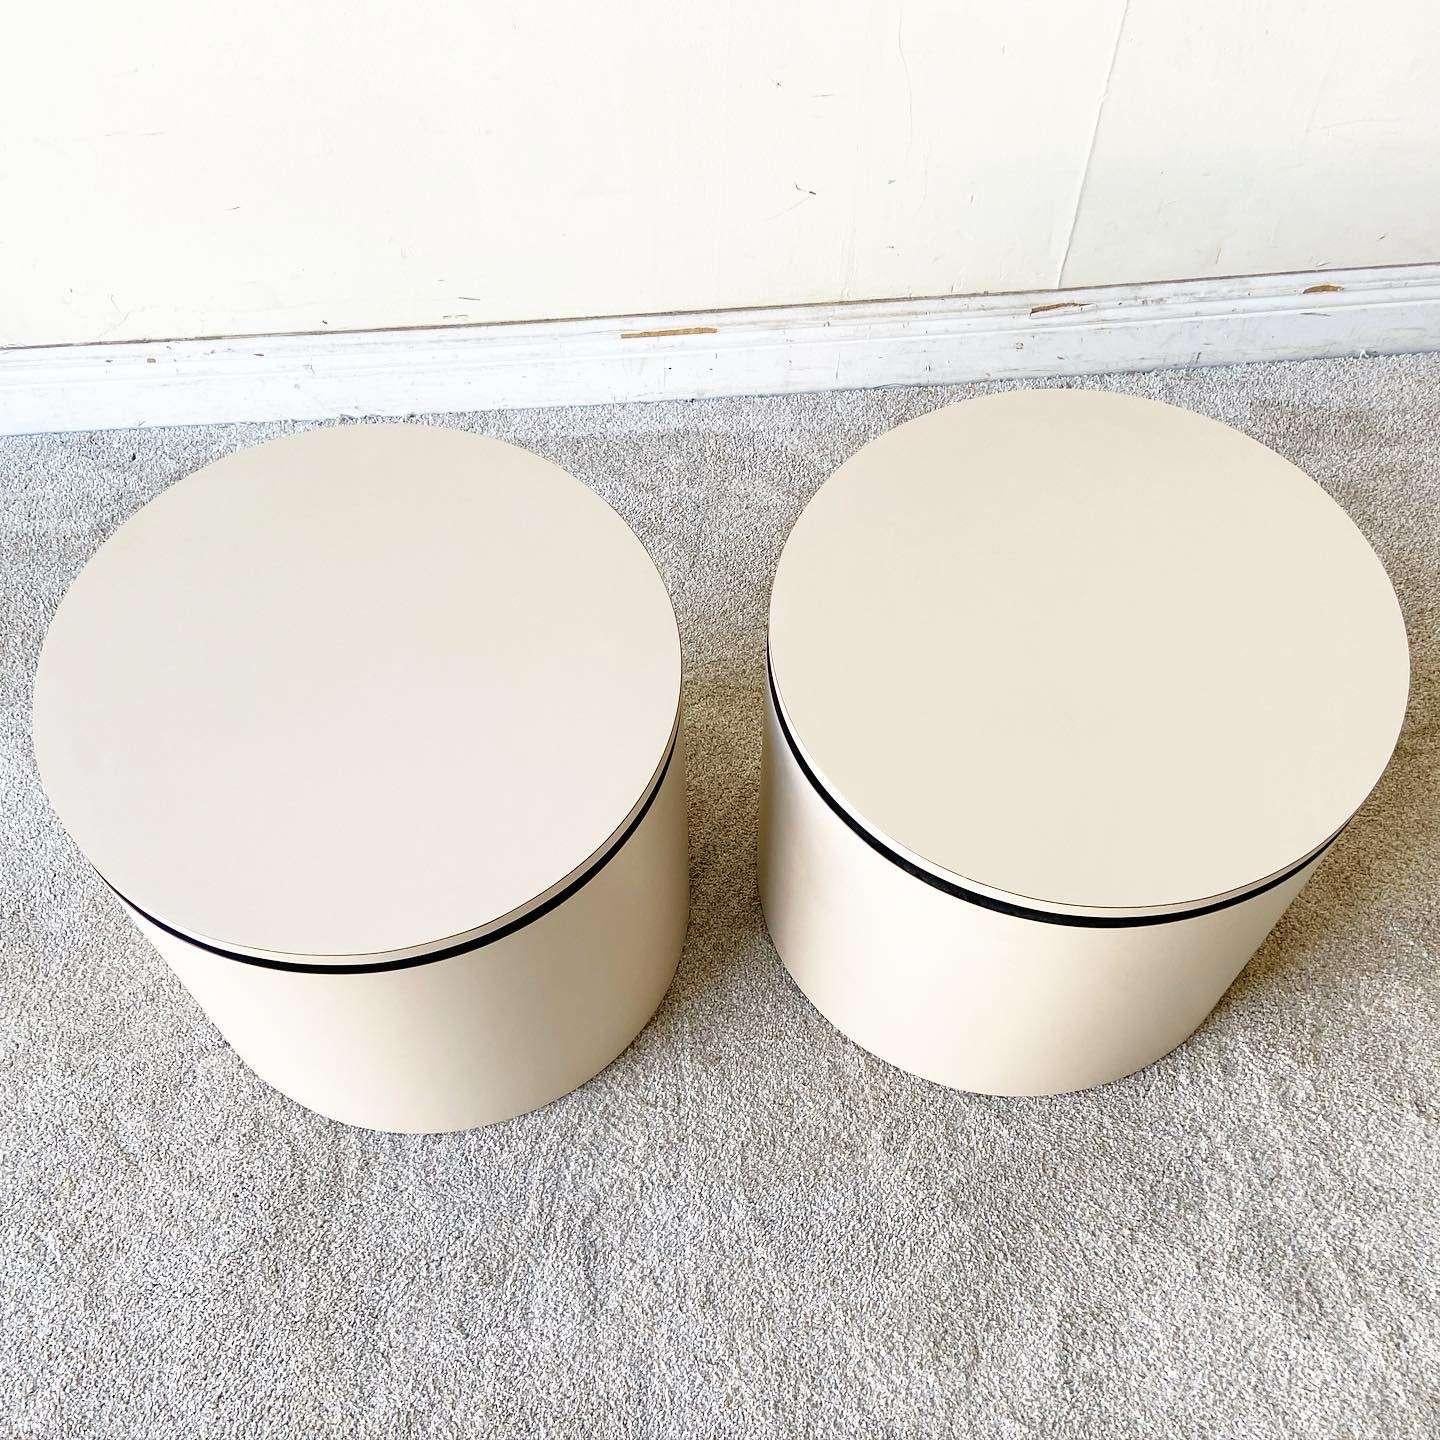 Post-Modern Postmodern Tan & Black Lacquer Laminate Circular Side Tables on Casters - a Pair For Sale